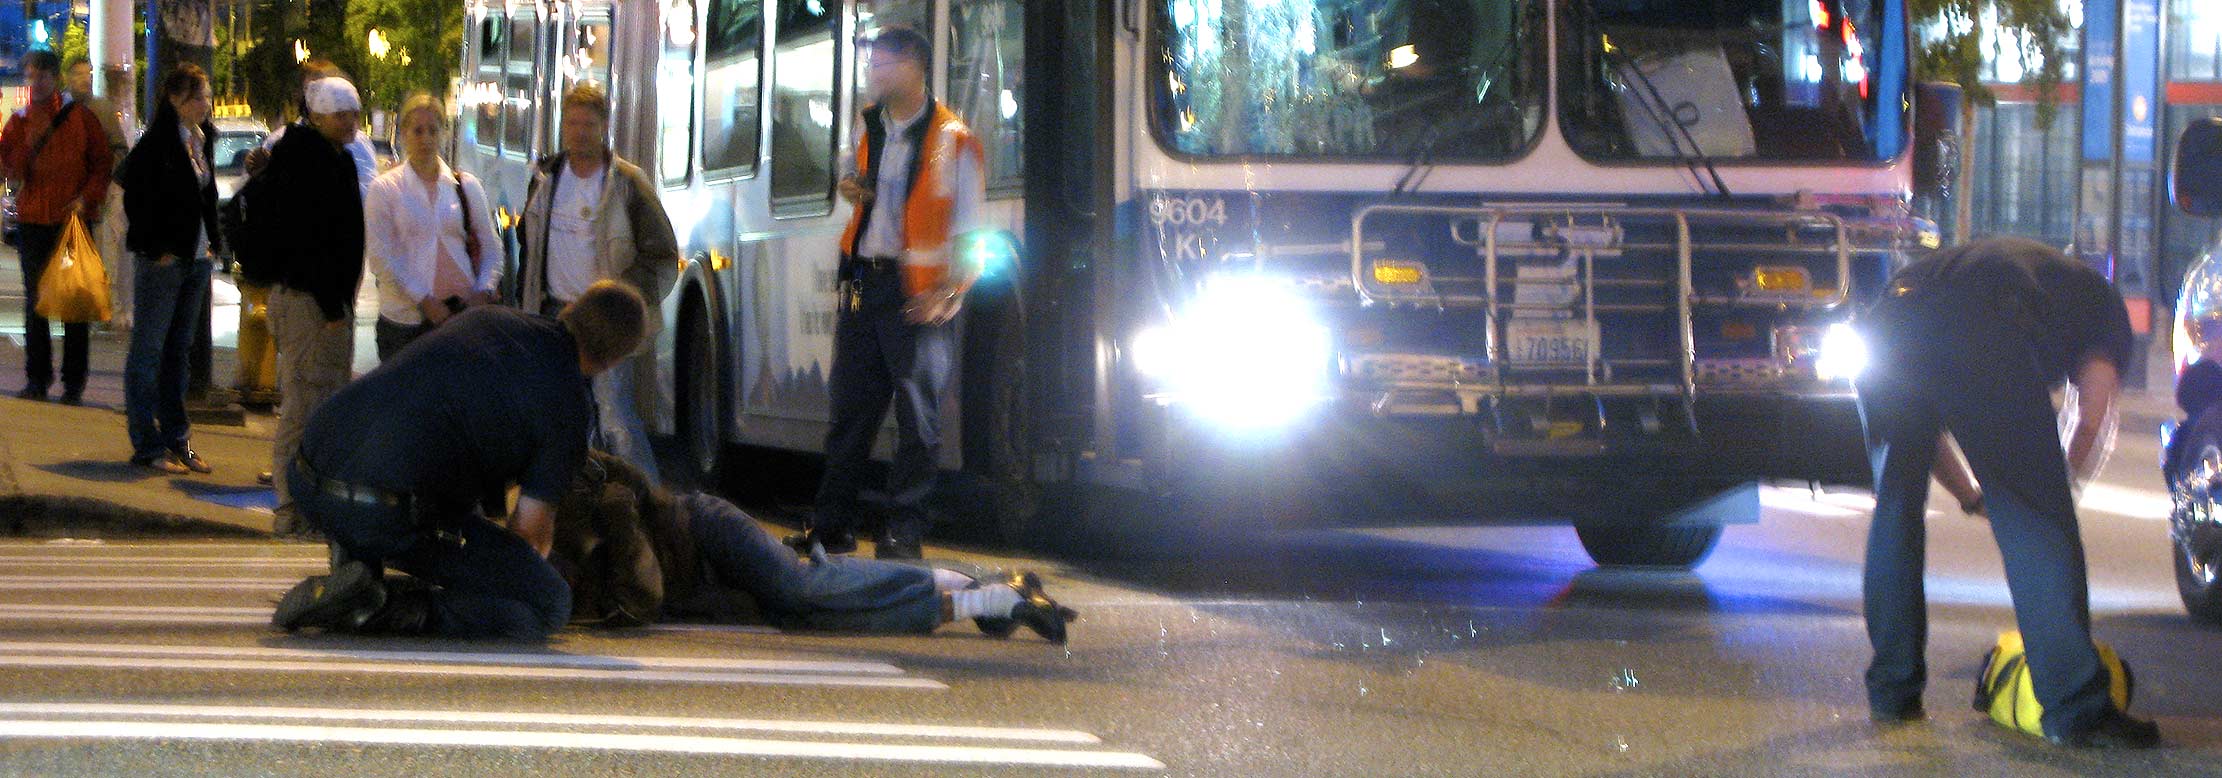 Pedestrian lies on the street after being hi by bus.